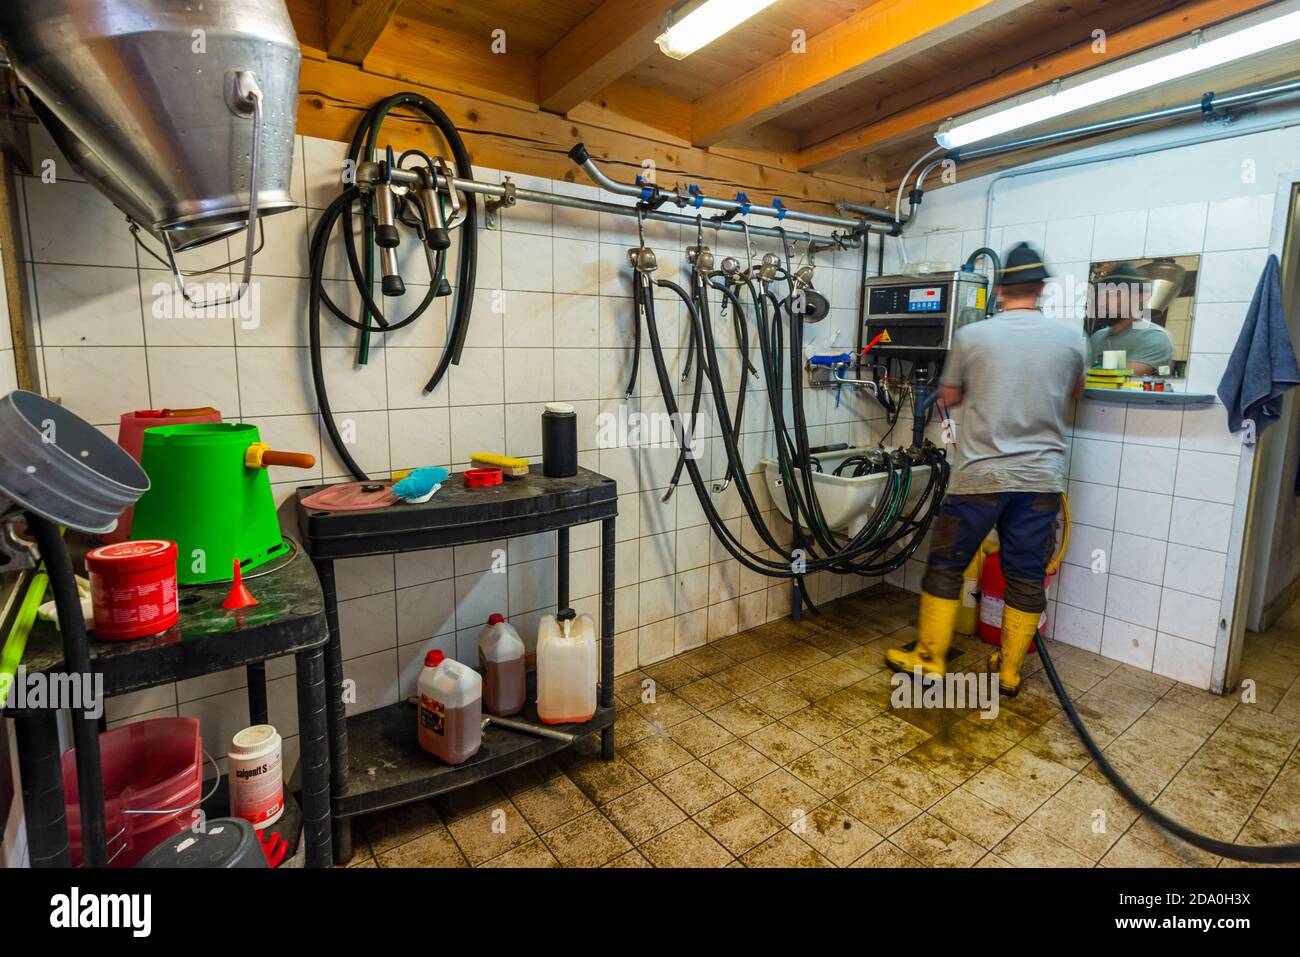 Farmer  cleans the hoses of the milking machine, Ackernalm, Tyrol, Austria Stock Photo